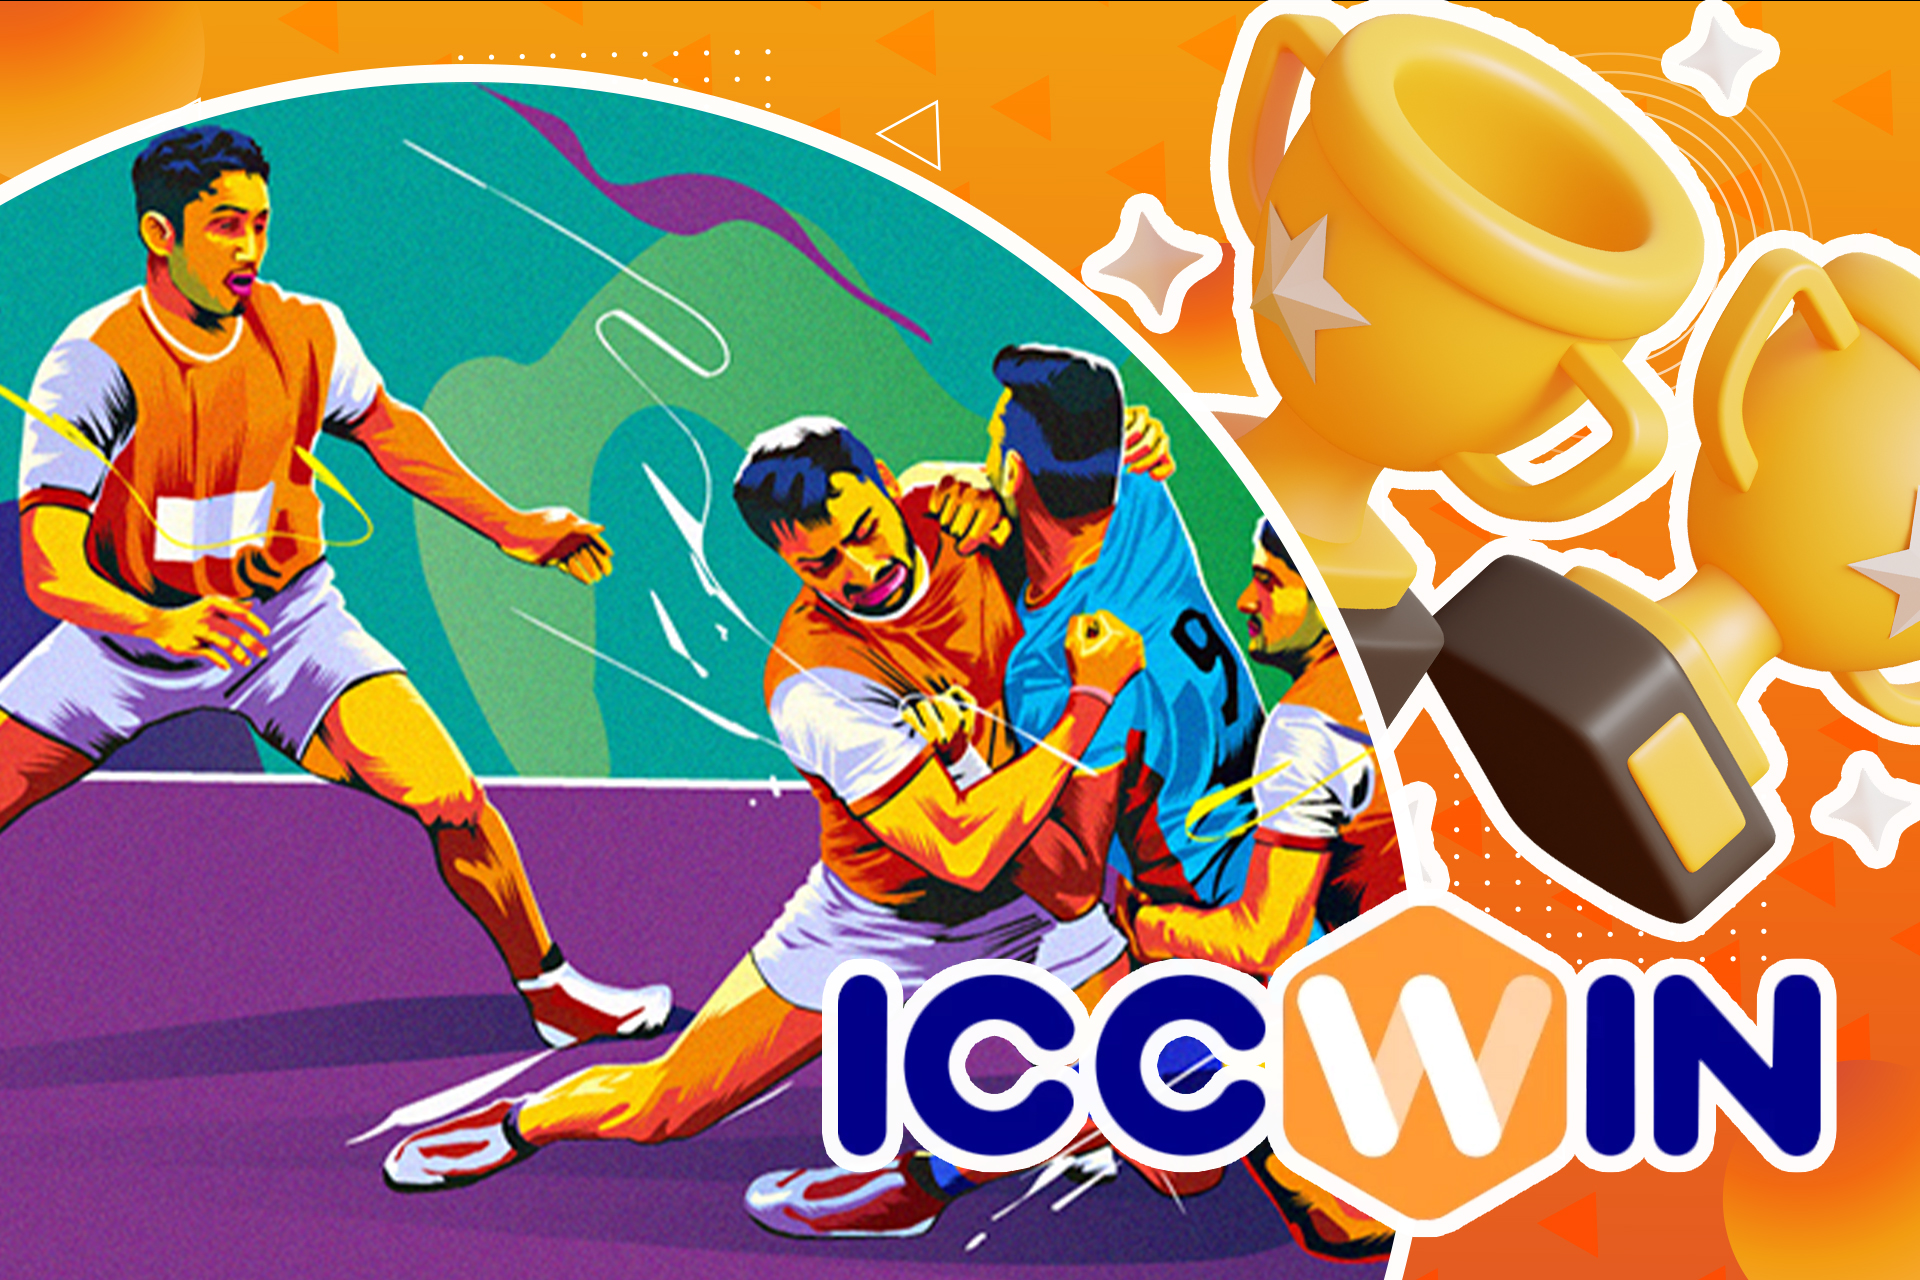 You will find various popular kabaddi leagues and tournaments on ICCWIN.